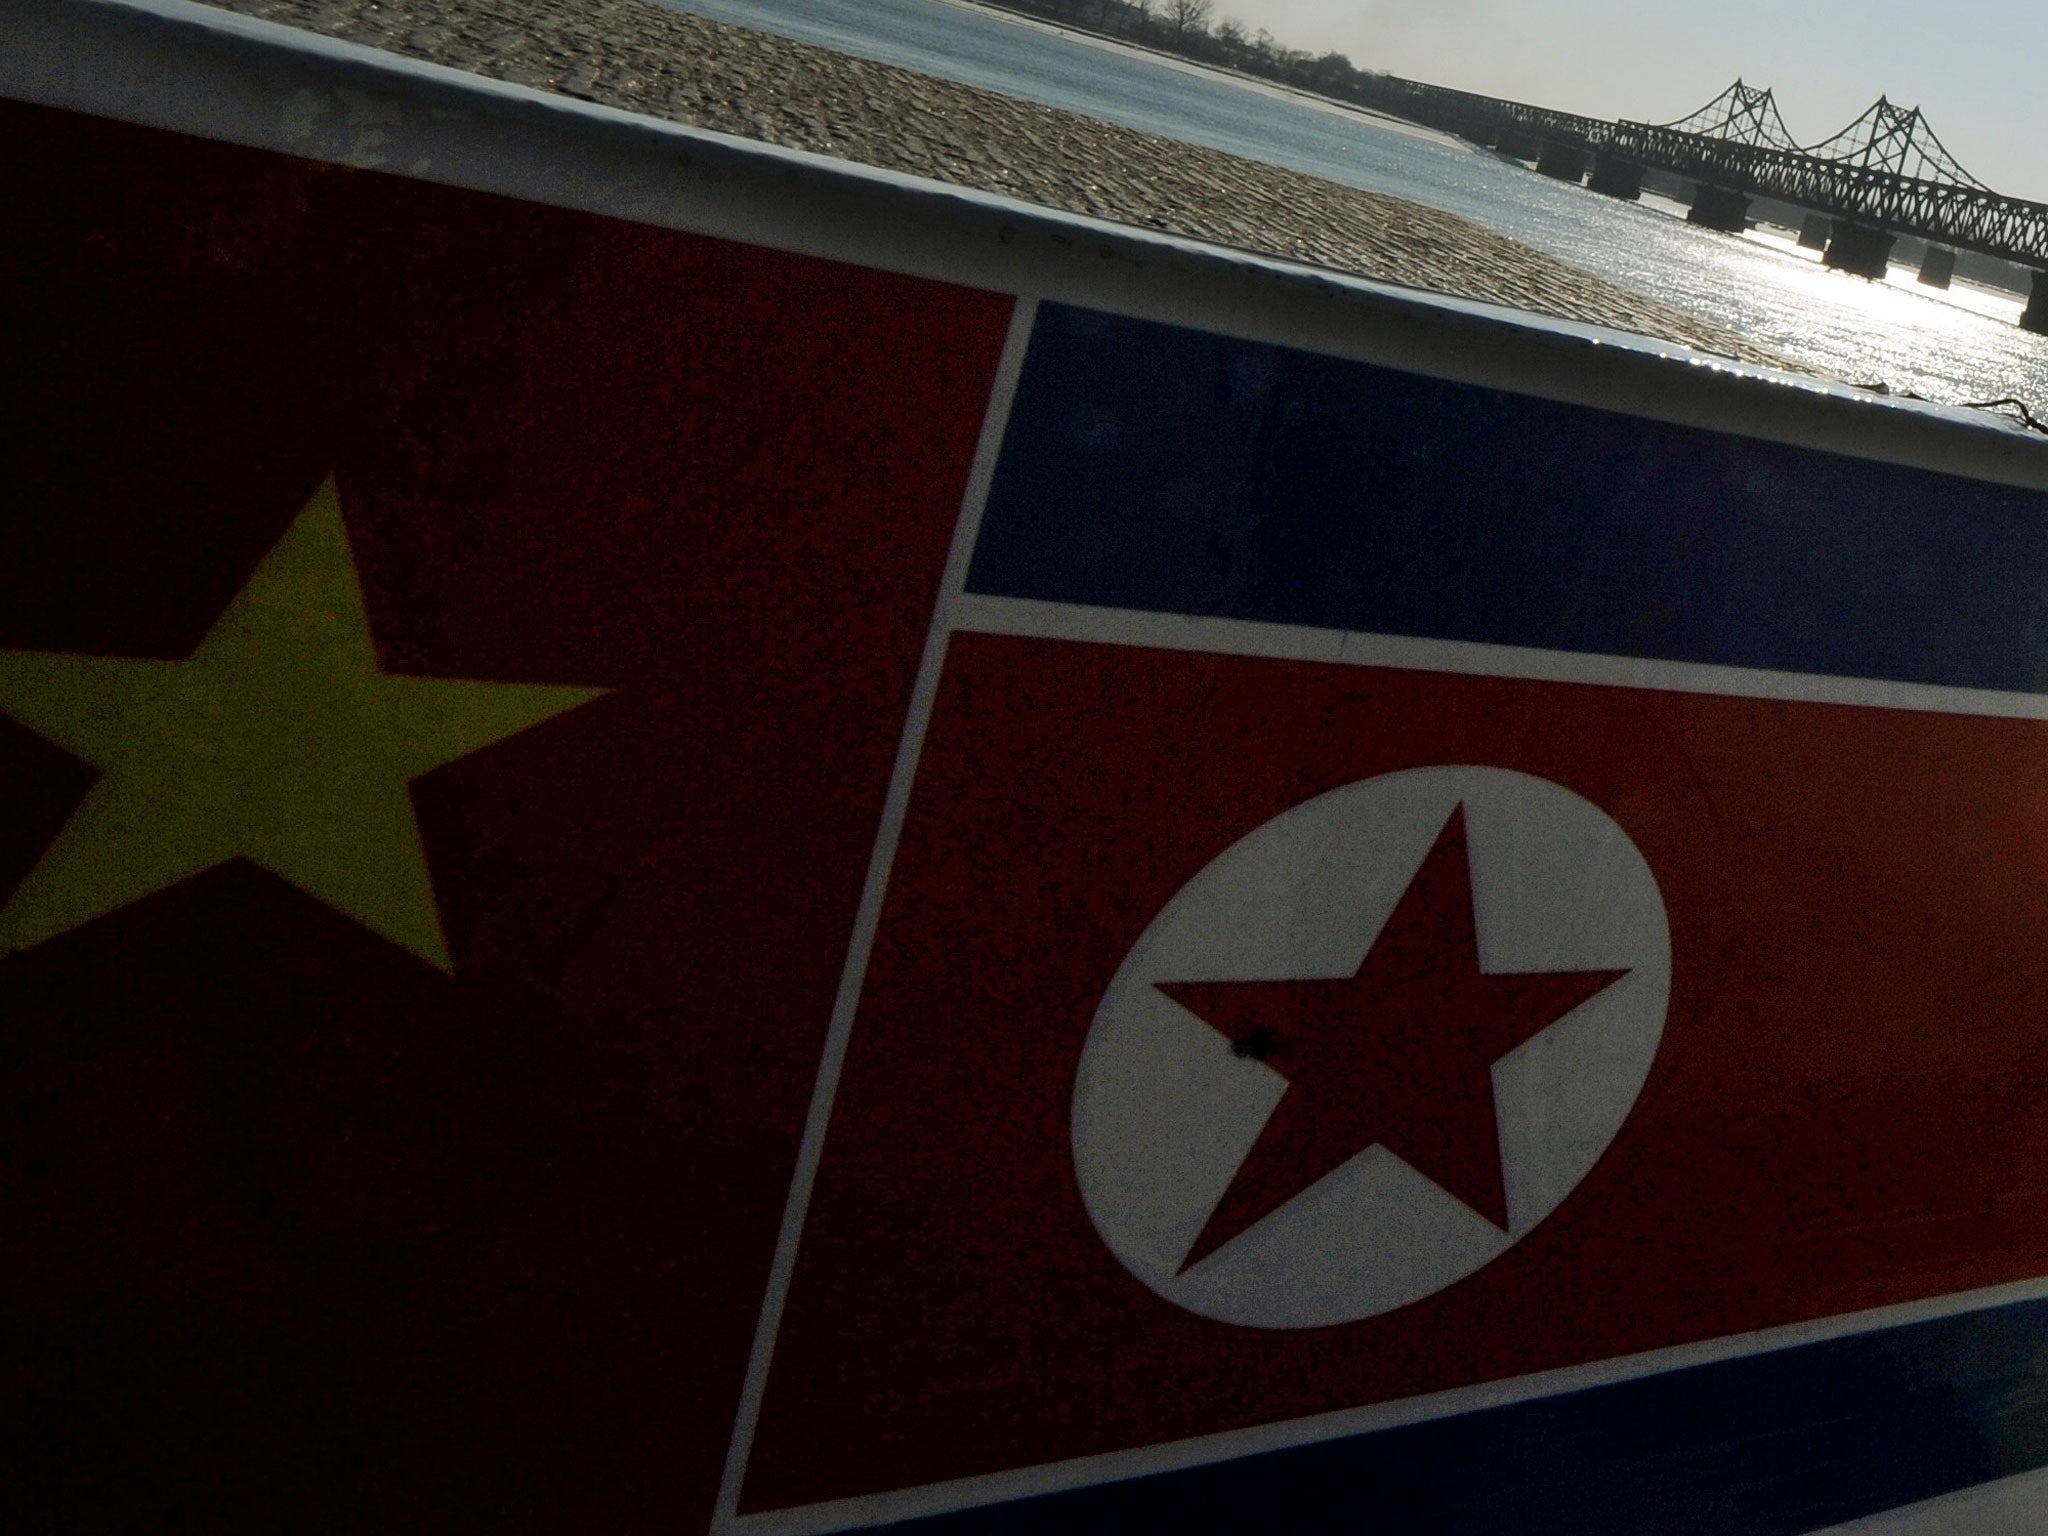 China has stepped up inspections of cargo bound for North Korea, targeting luxury goods as well as necessities